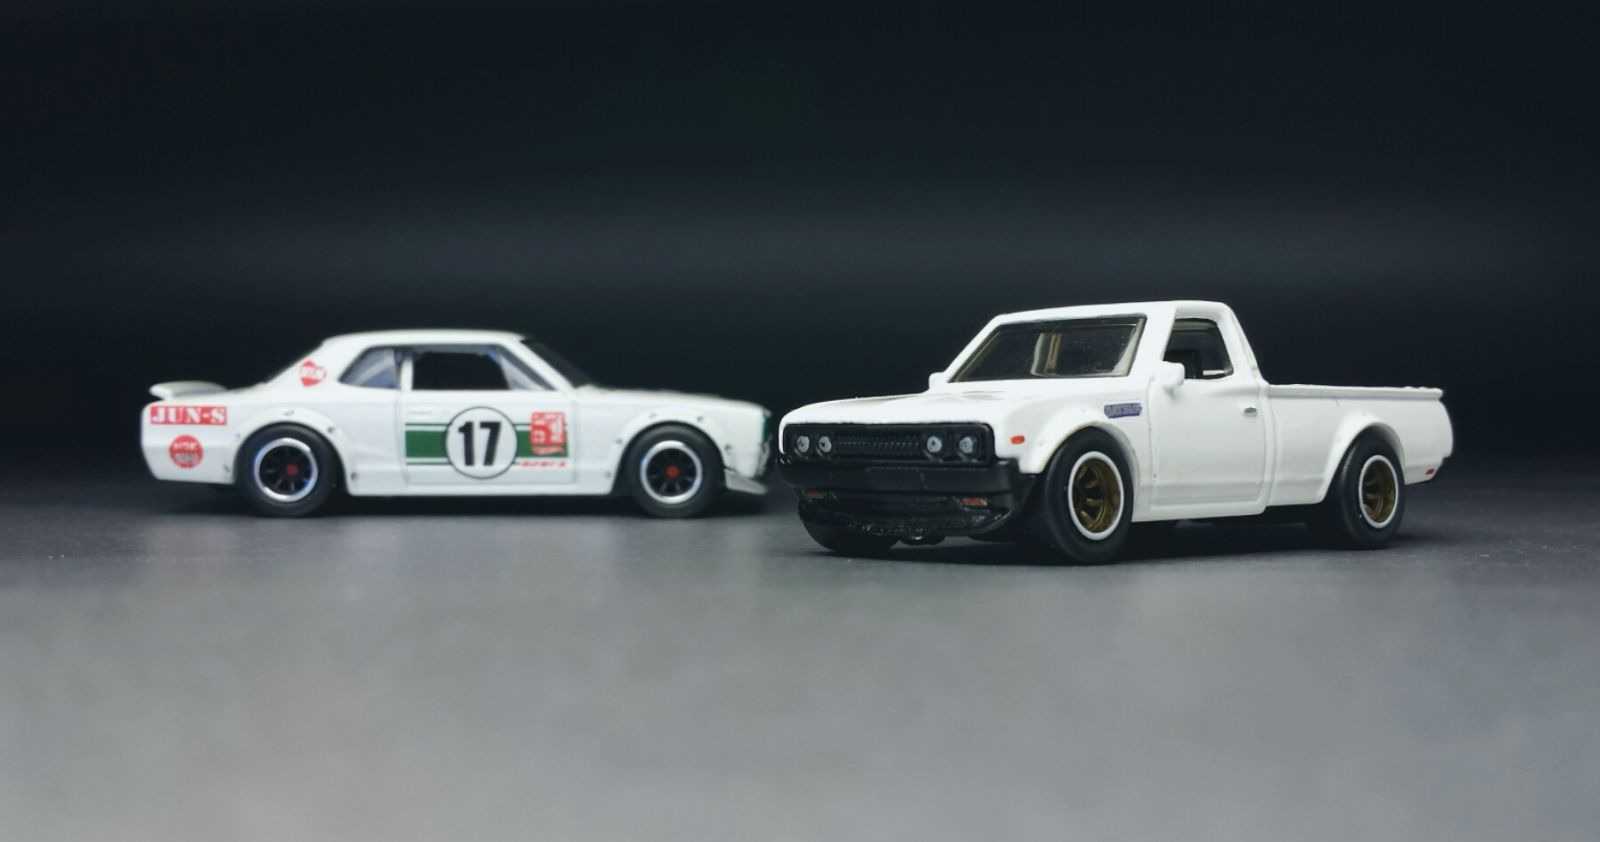 Illustration for article titled Land of the Rising Sun-day: Datsun 620 [Custom]